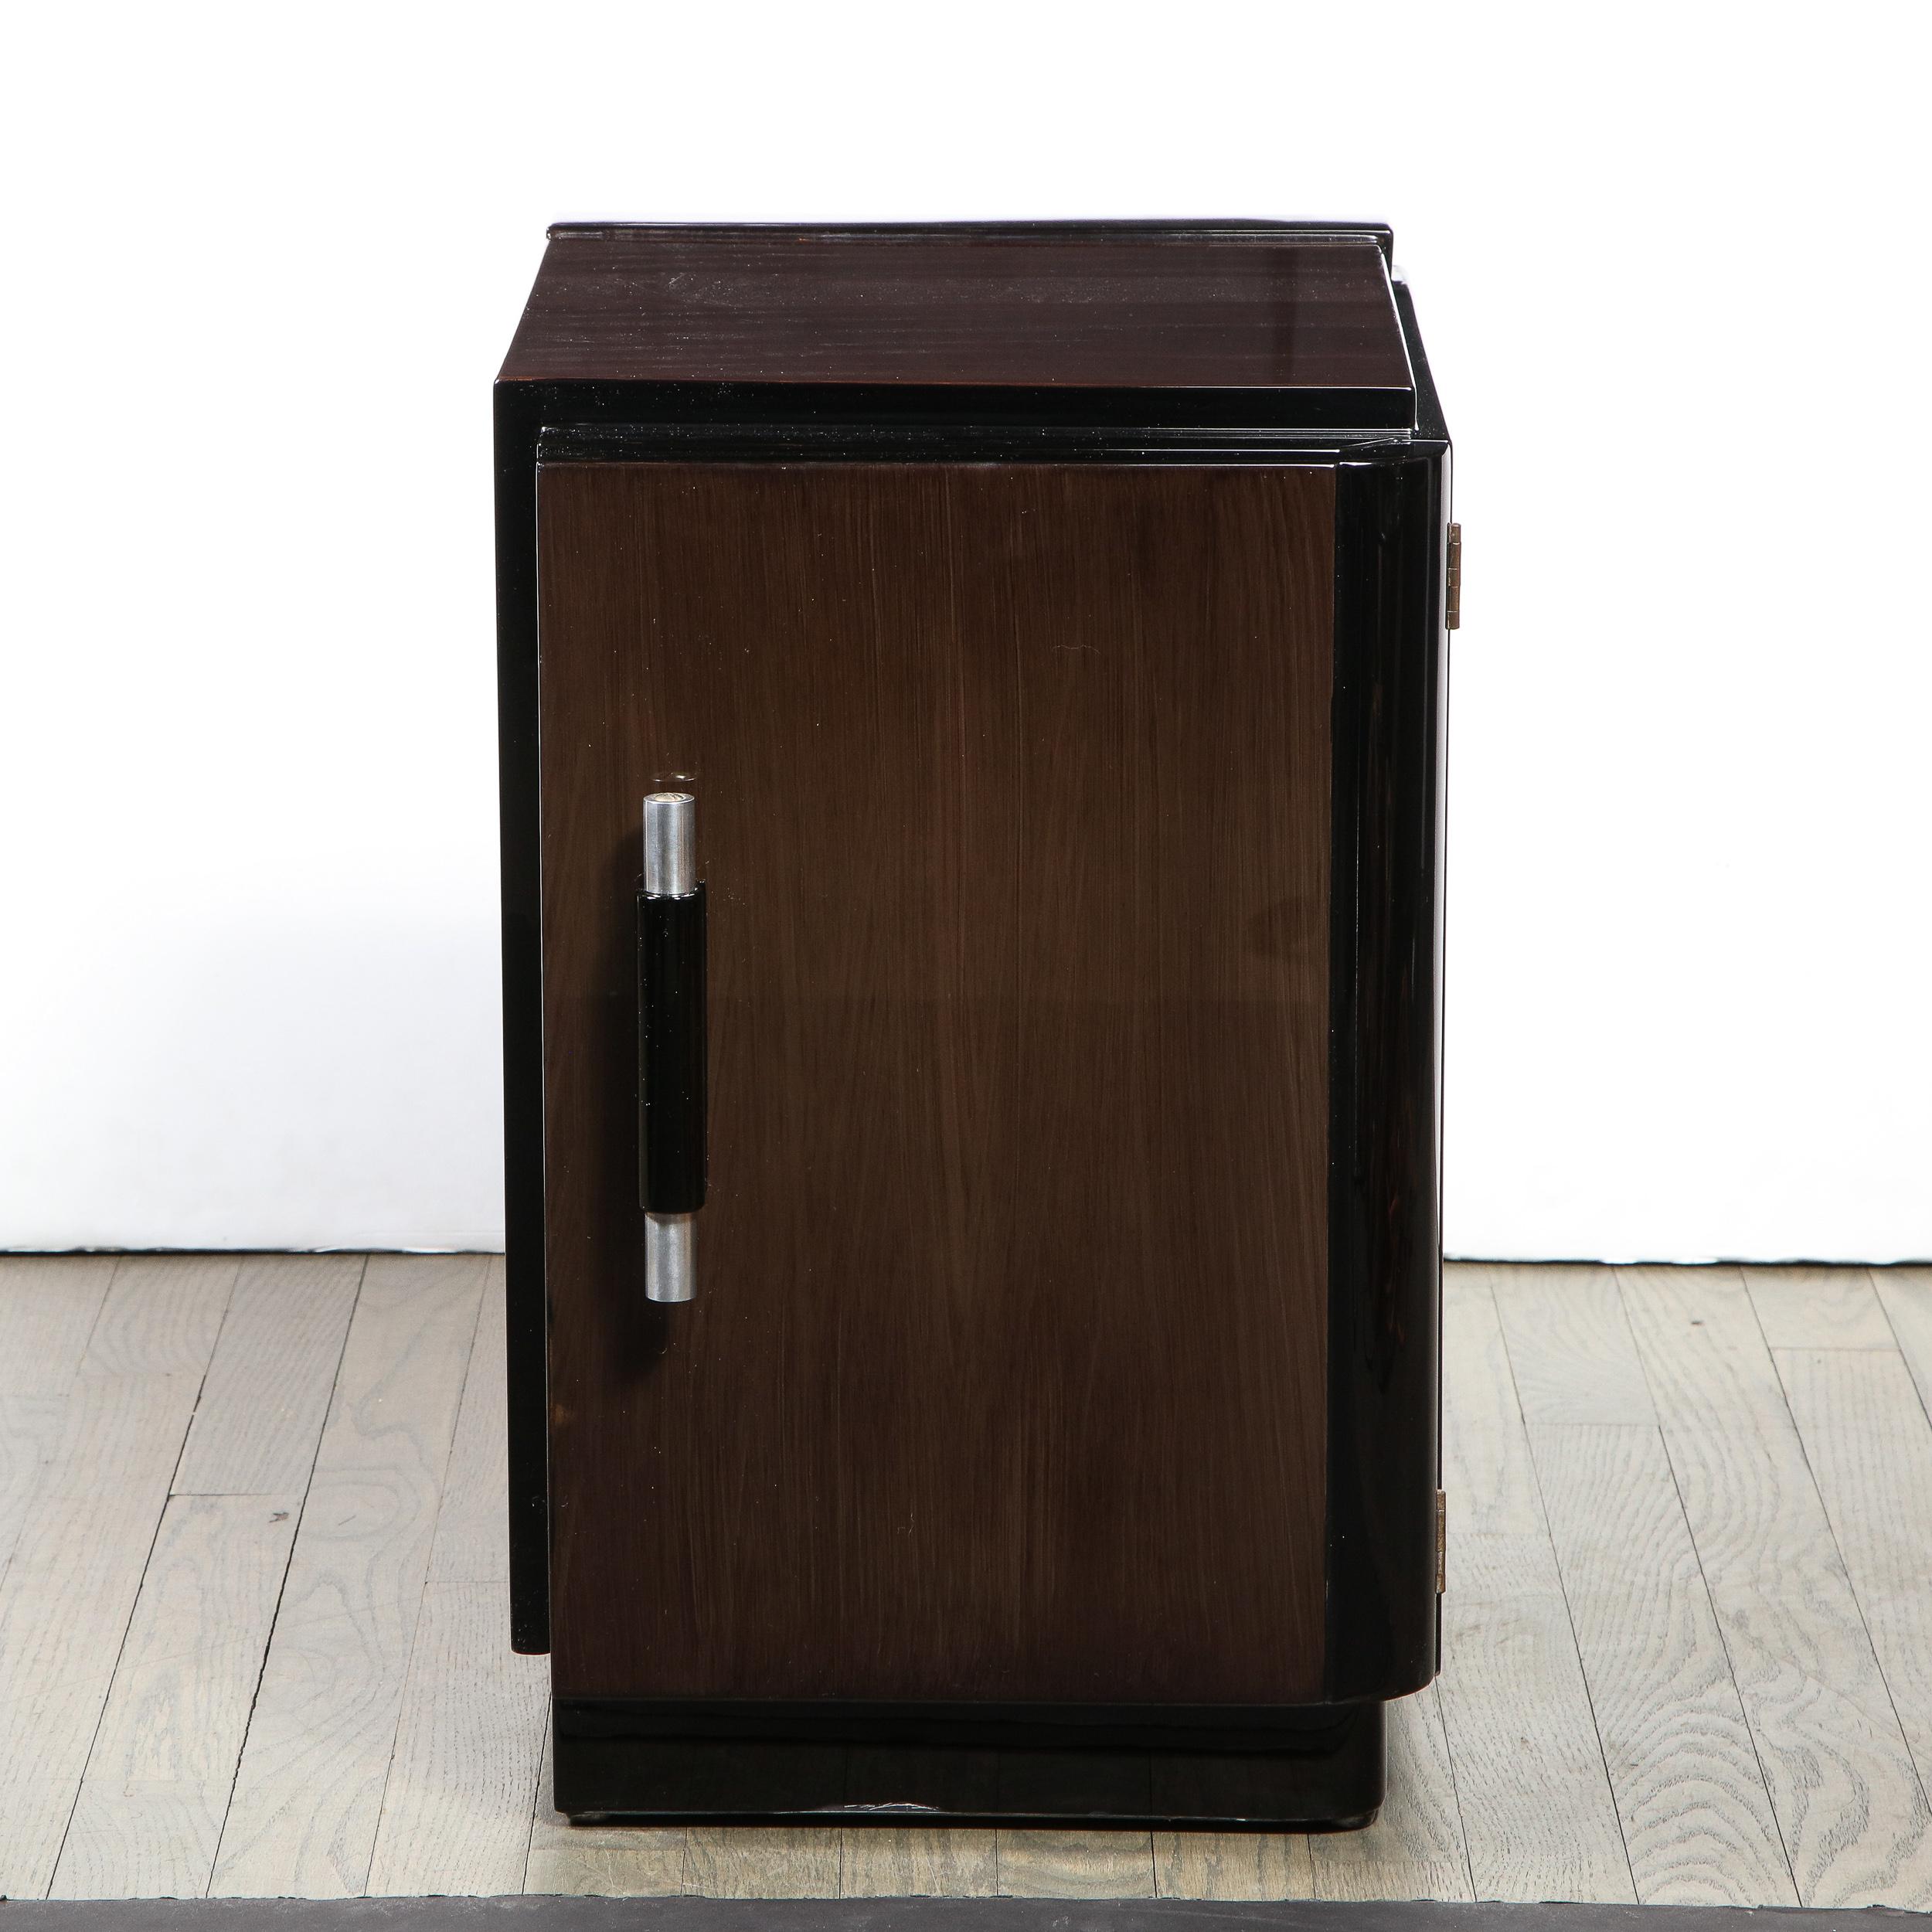 This graphic and elegant pair of Art Deco Machine Age nightstands were realized in the United States circa 1935. They feature rectilinear bodies with stepped skyscraper style bases; black lacquer detailing circumscribing the edges; and streamlined